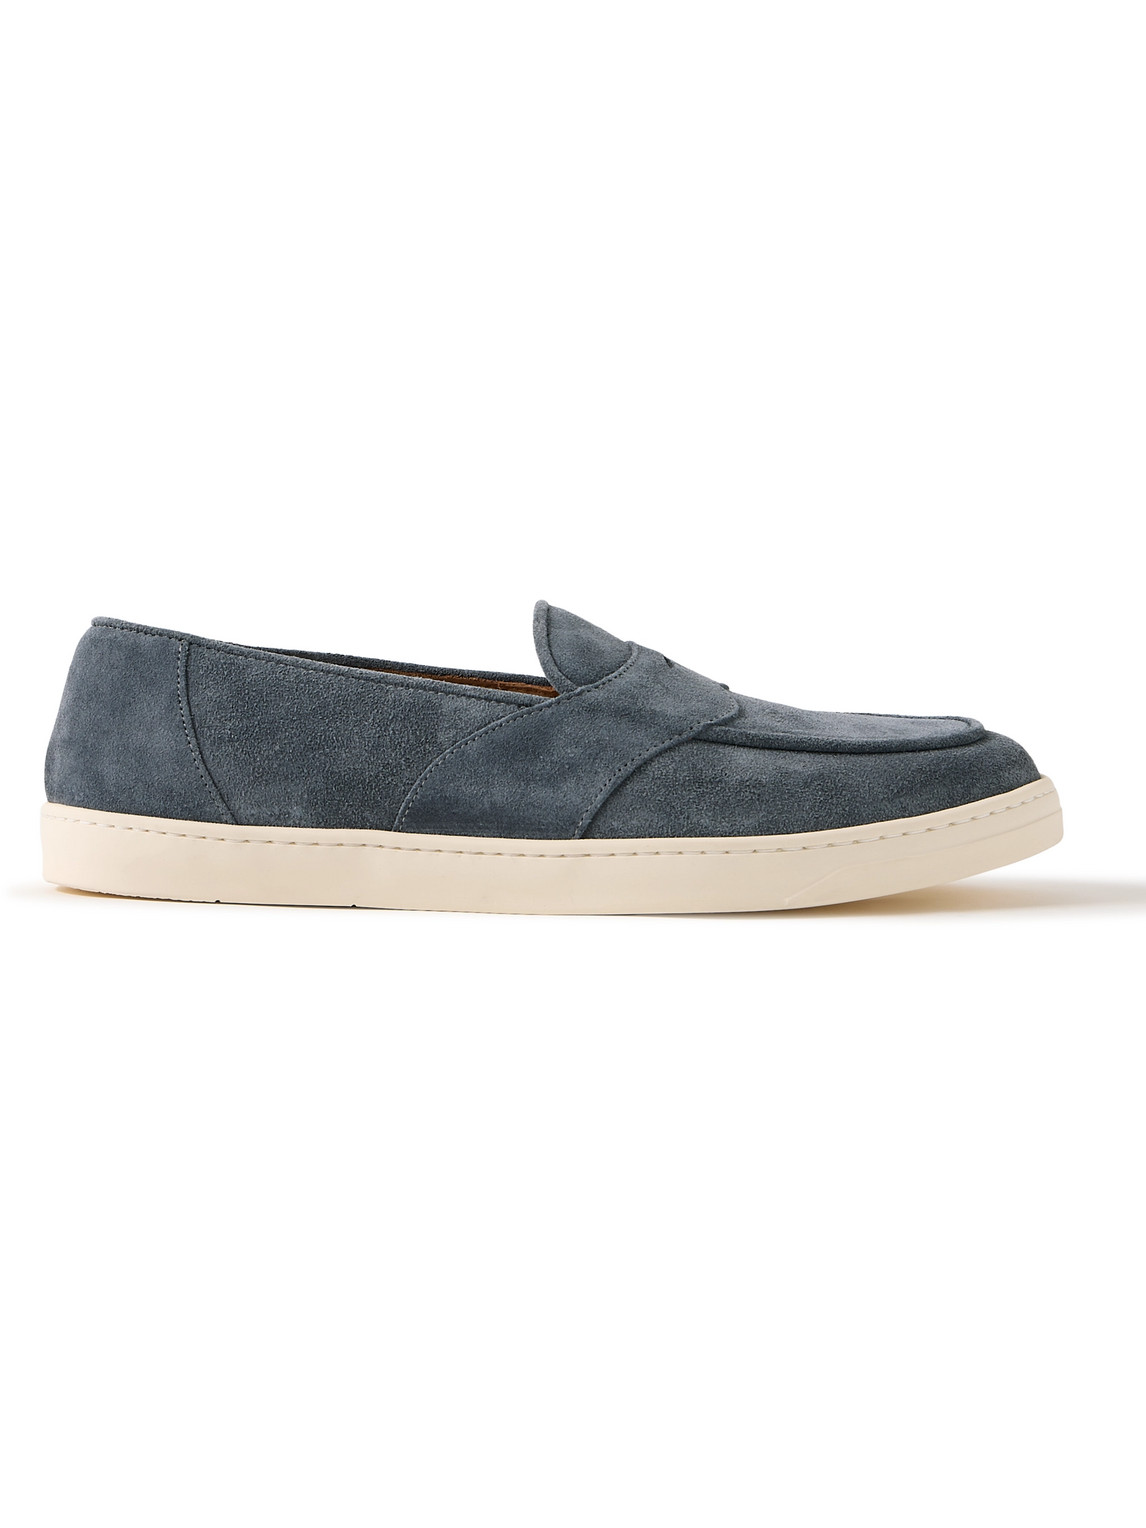 George Cleverley - Joey Suede Penny Loafers - Men - Blue - UK 9 von George Cleverley